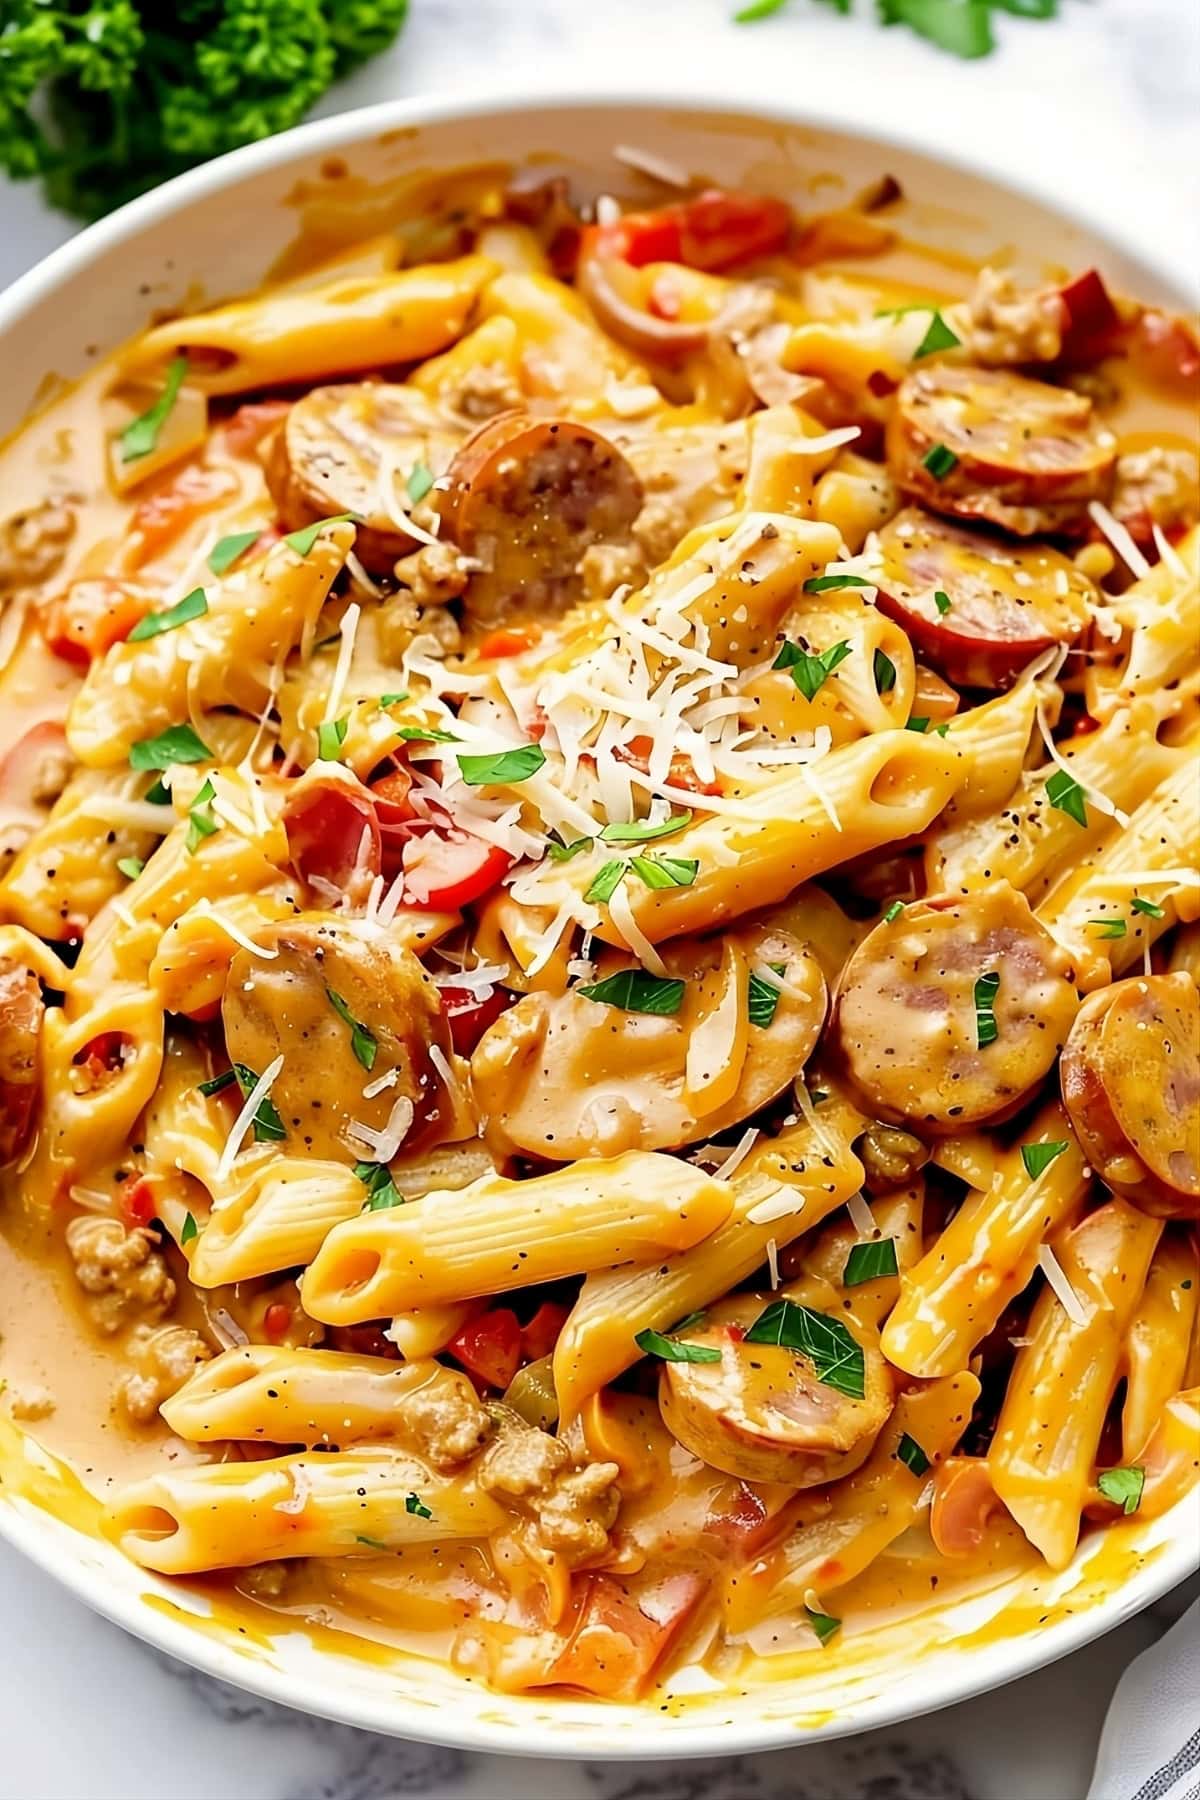 Cajun sausage pasta with creamy sauce and sliced sausage served in a white plate.